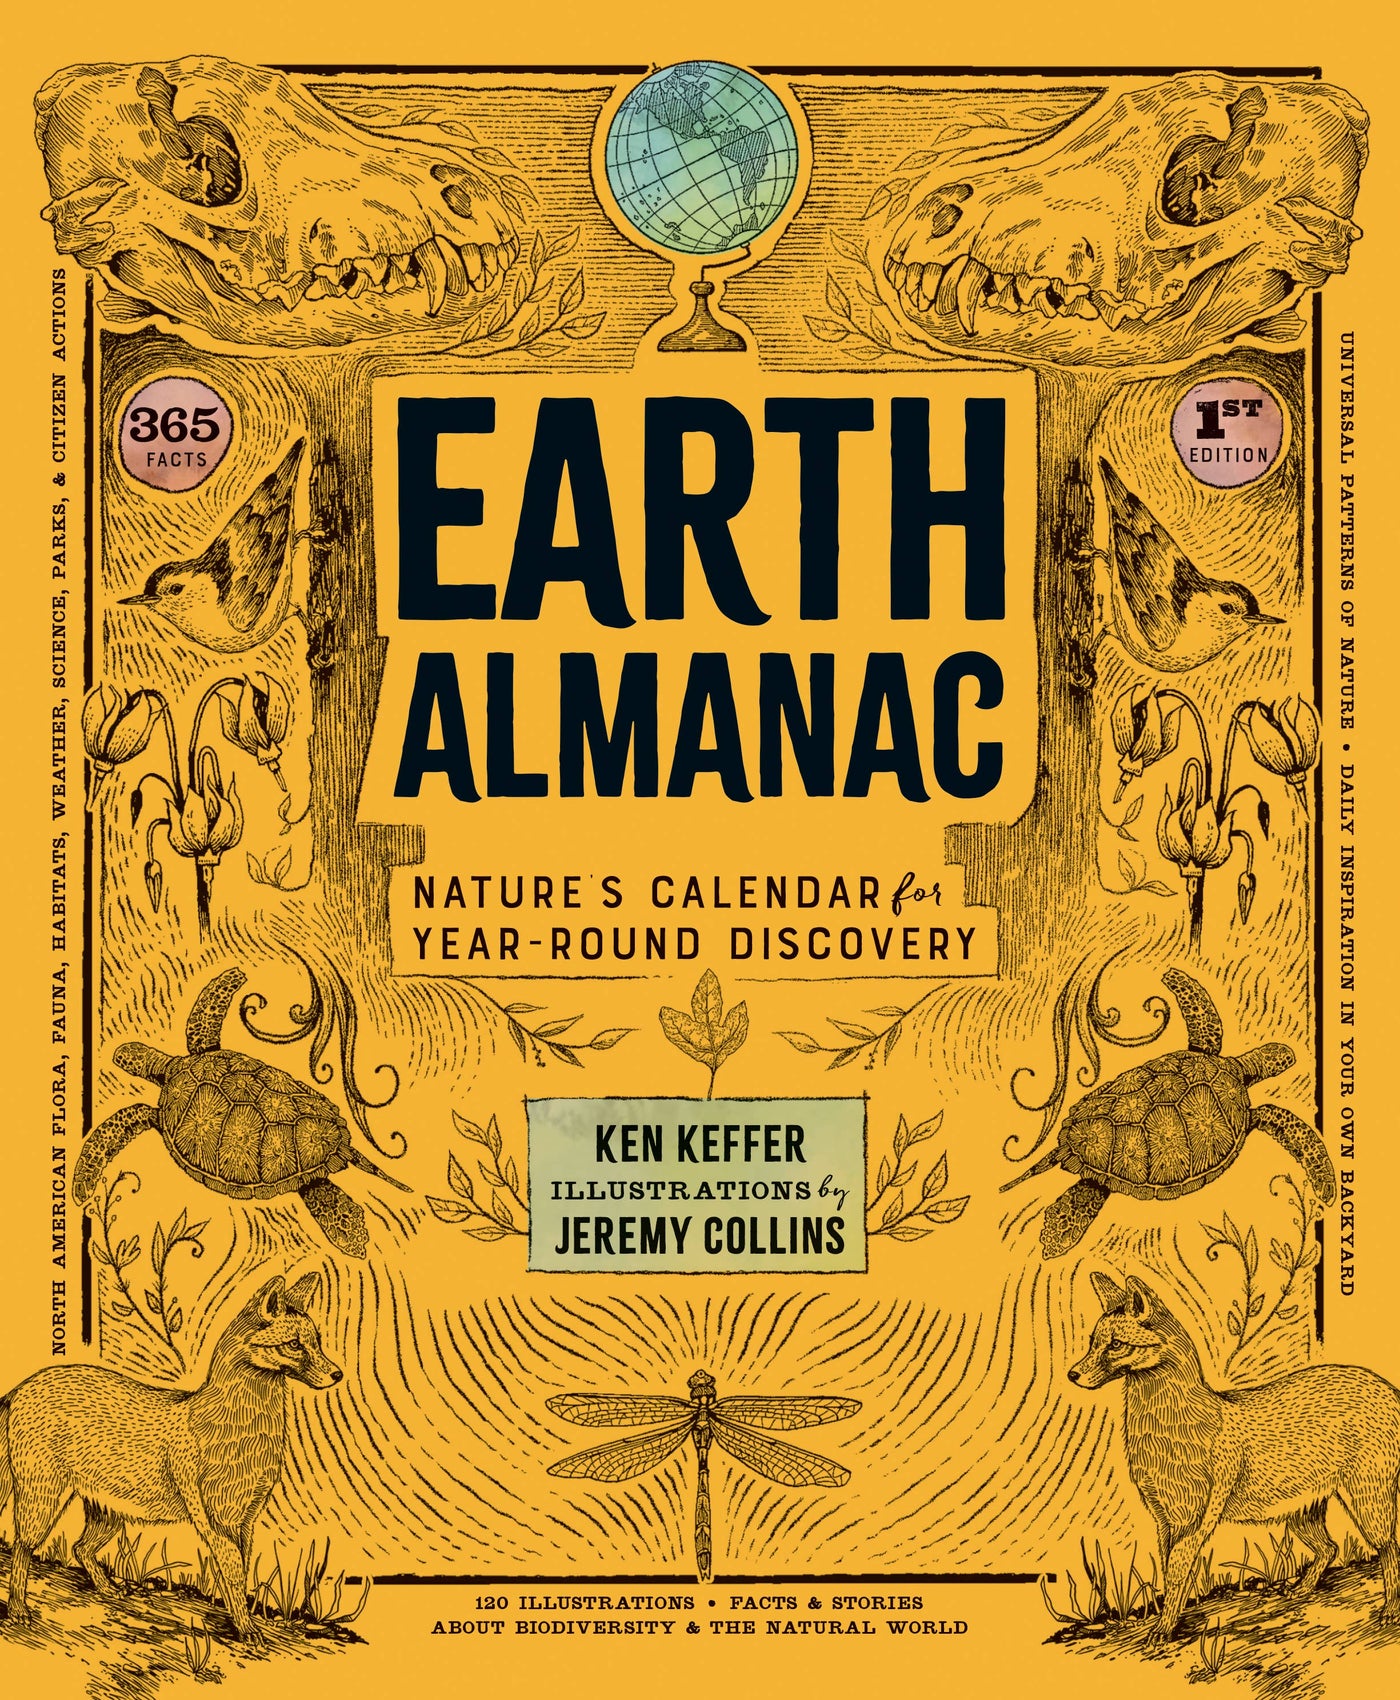 Earth Almanac Nature's Calendar for Year-Round Discovery